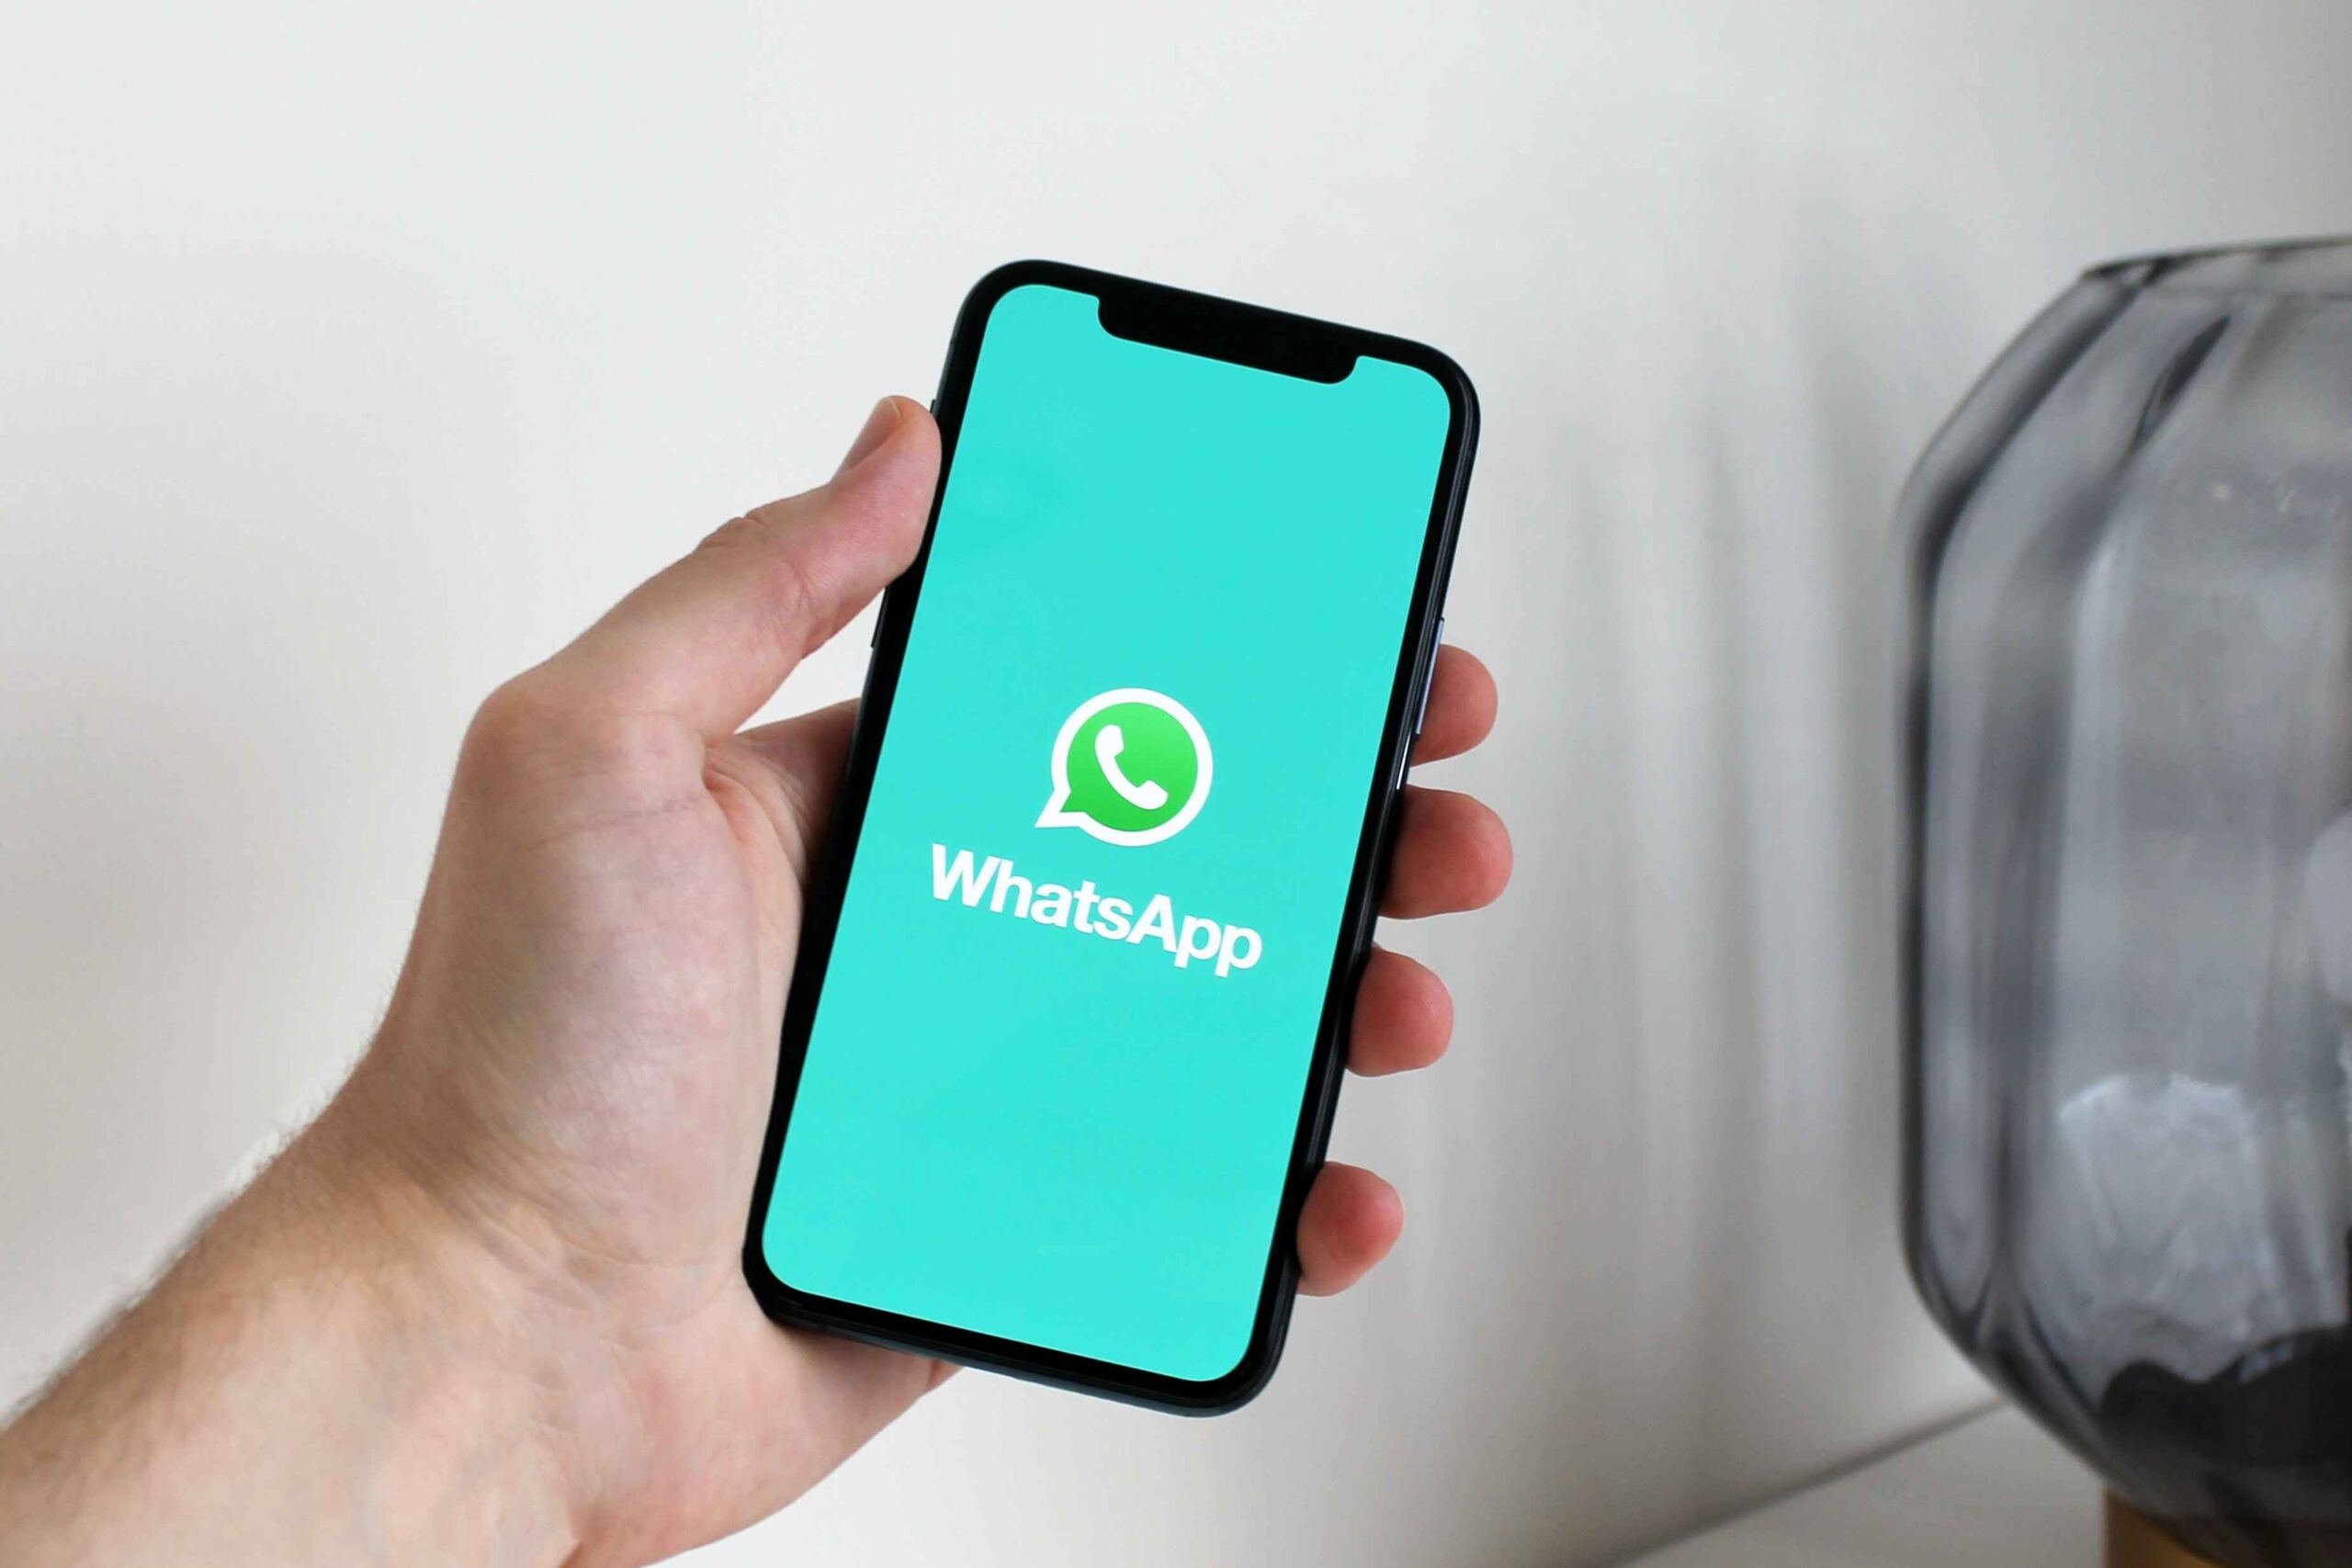 WhatsApp getting redesigned, will the user interface completely change?